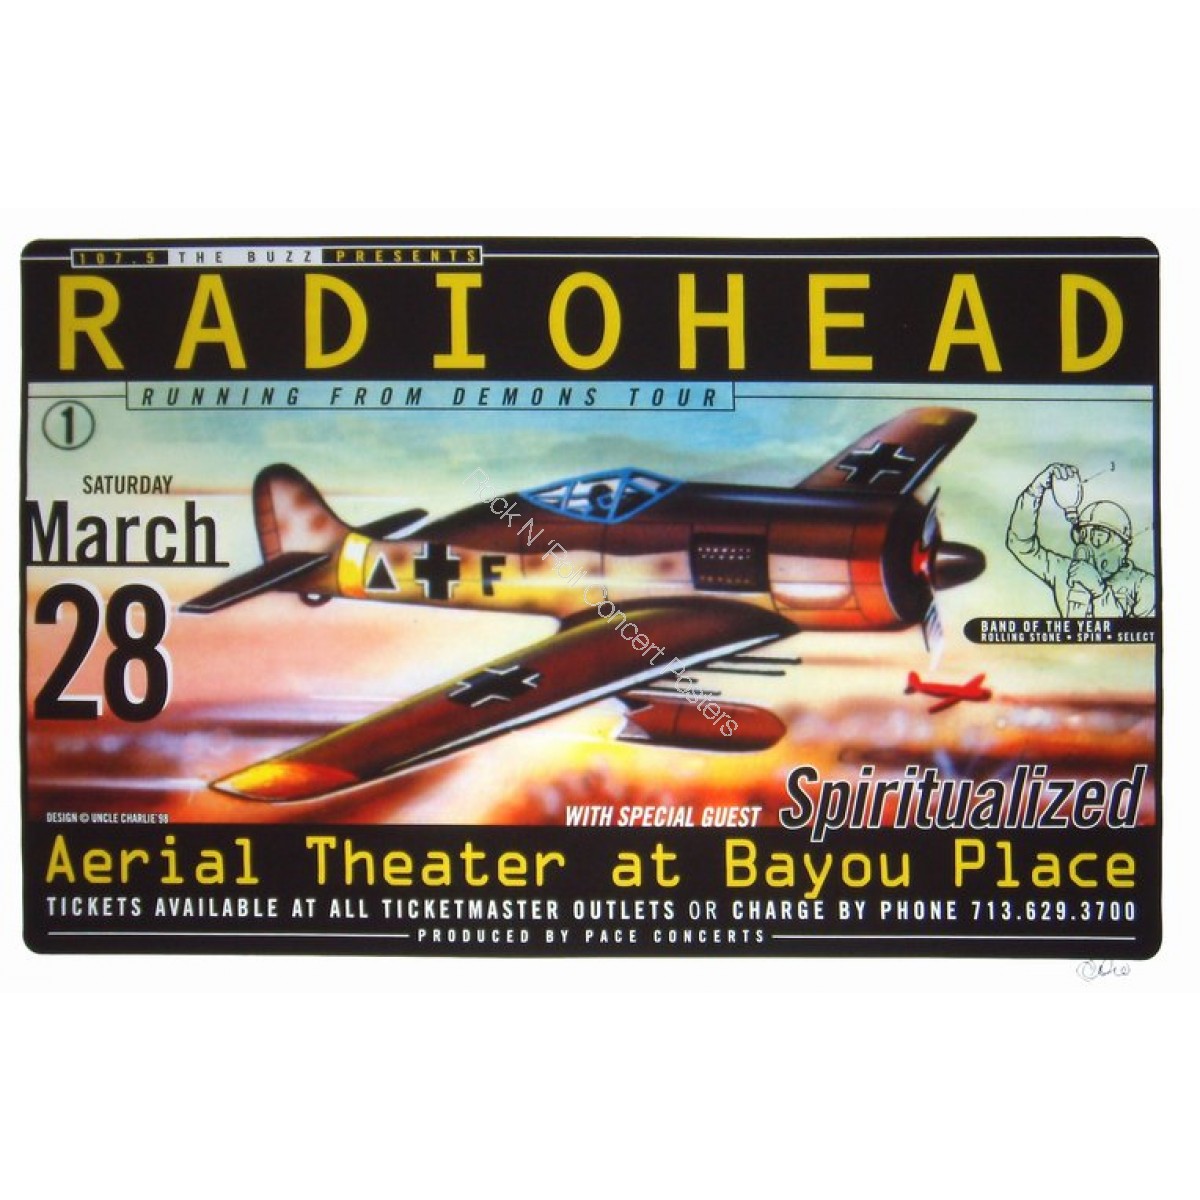 Radiohead @ The Aerial Theatre Houston TX 3/28/98 Official Concert Poster 1st Edition Hand Signed By The Artist